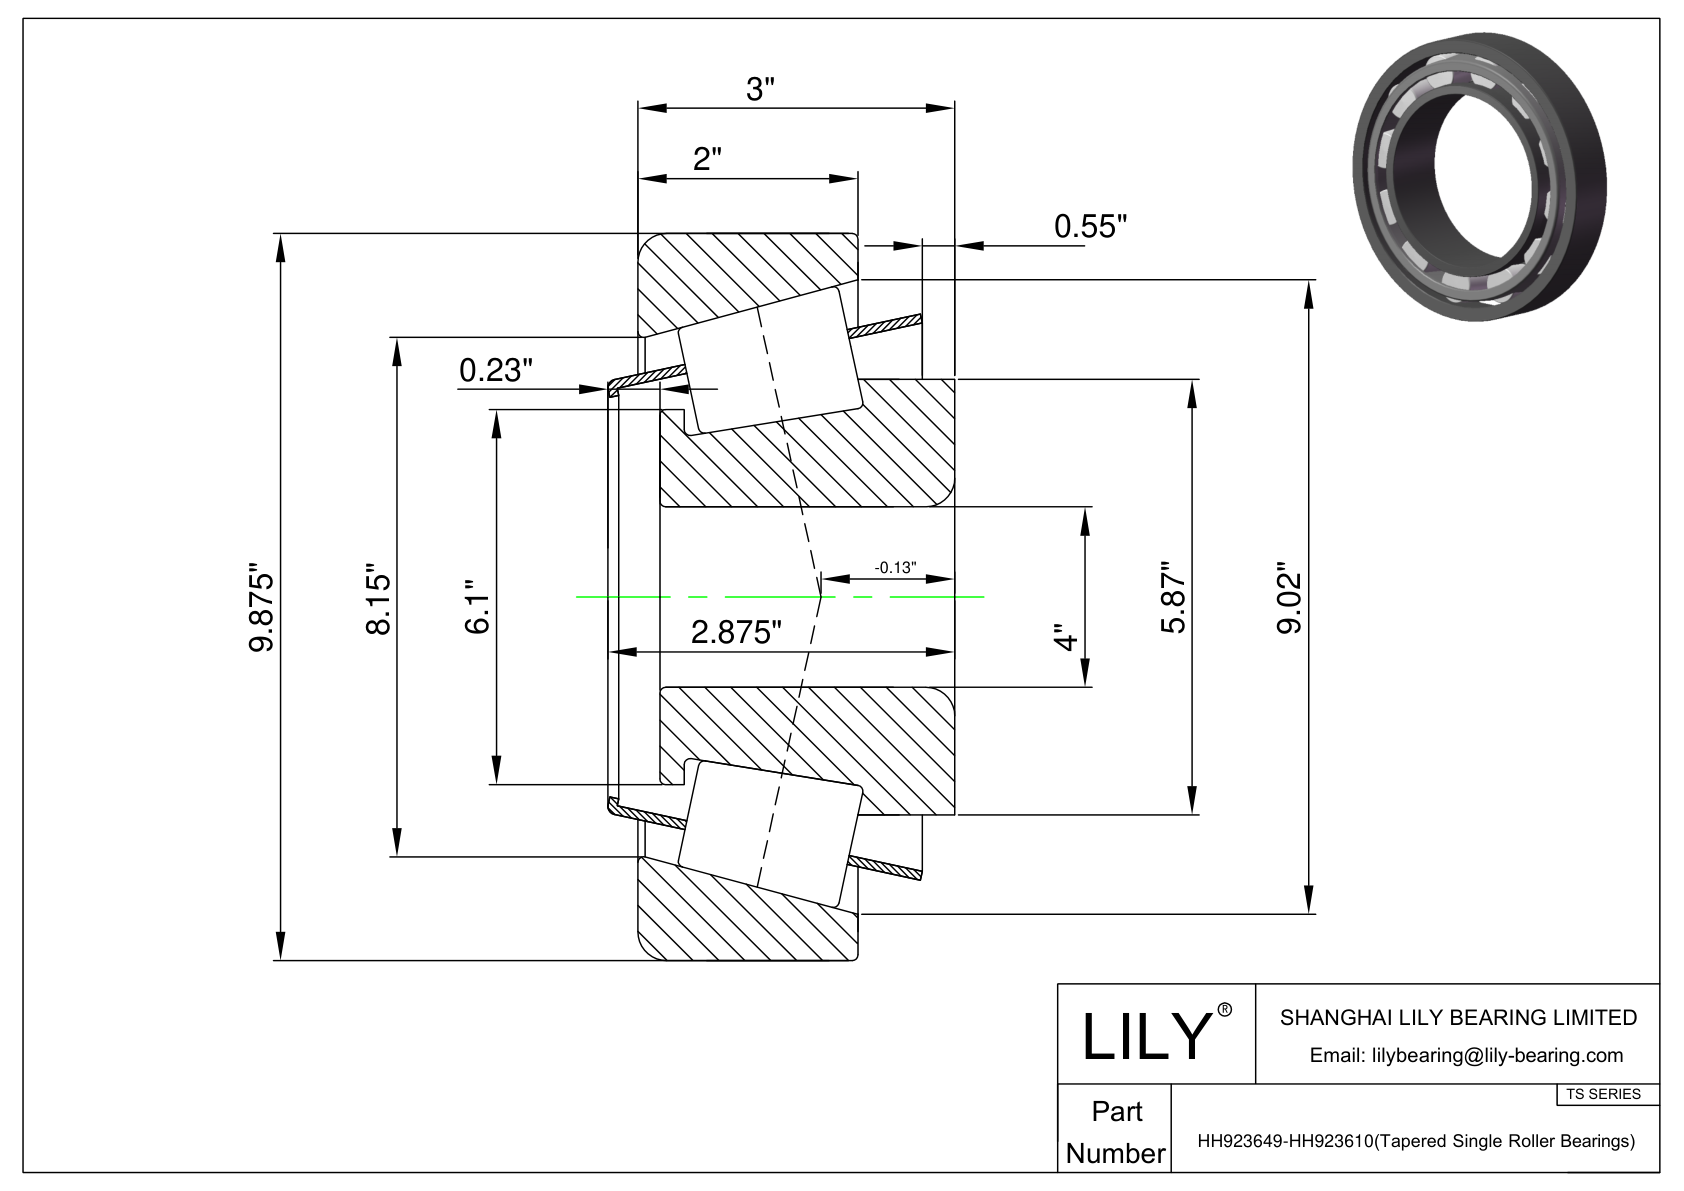 HH923649-HH923610 TS (Tapered Single Roller Bearings) (Imperial) cad drawing